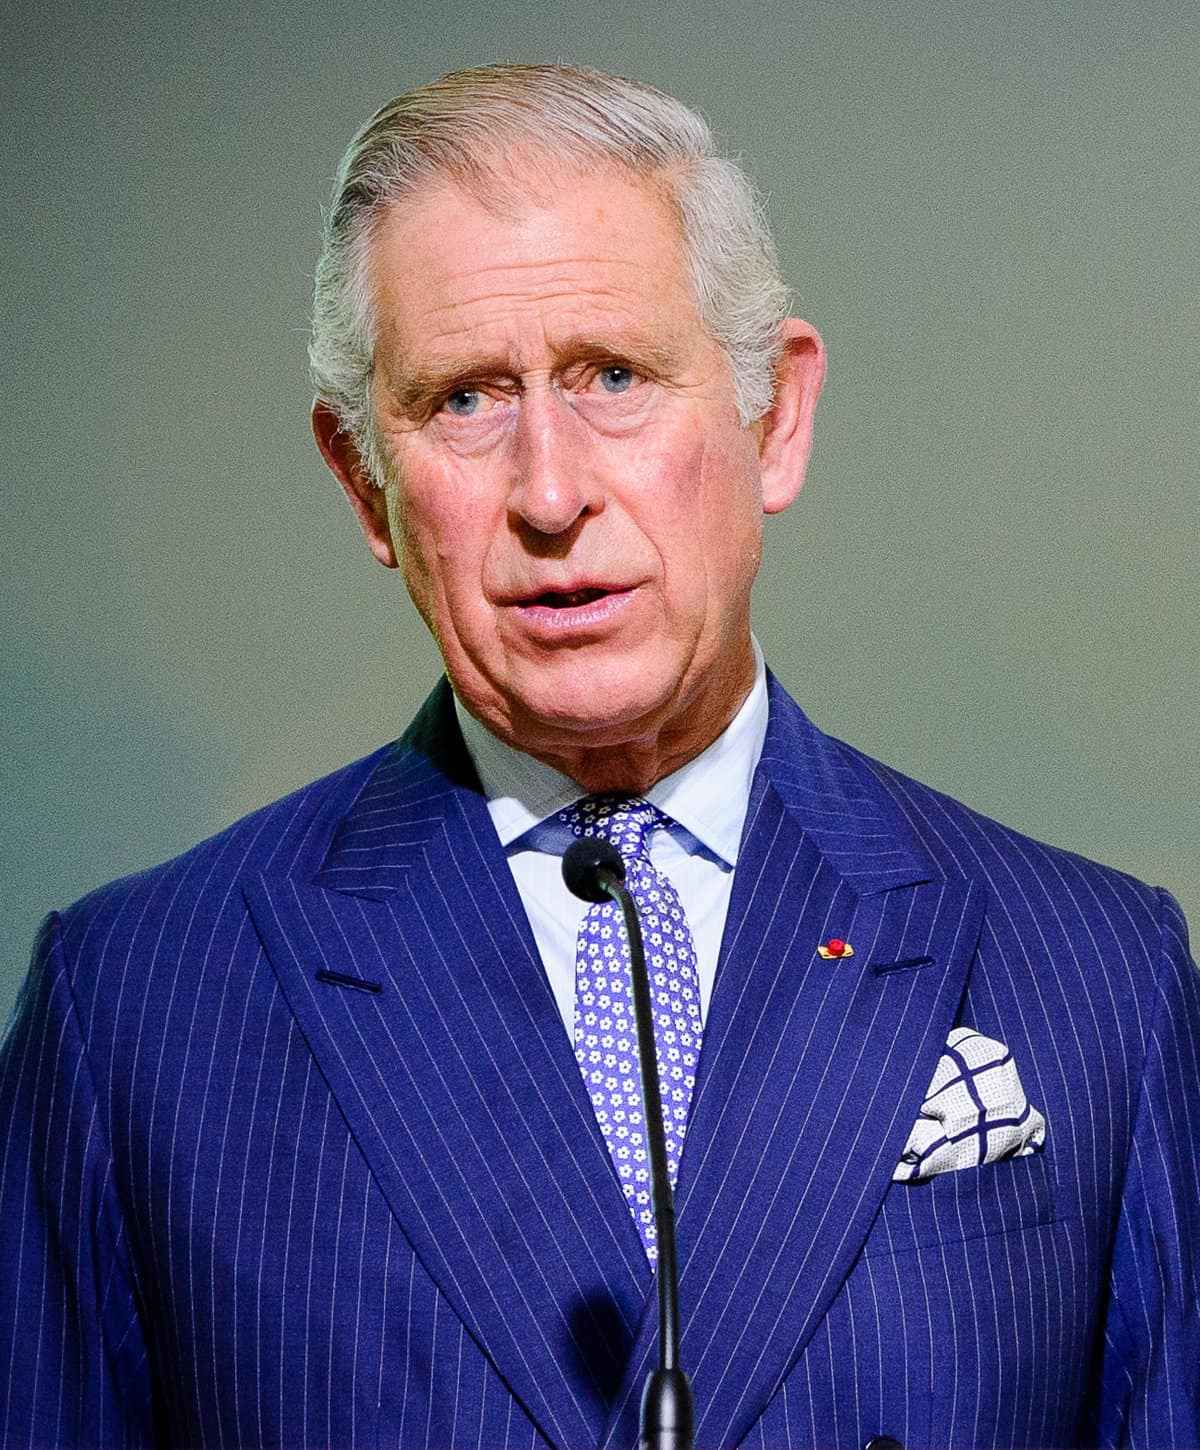 King Charles is shown in a royal blue pinstripe suit at a speaking event.